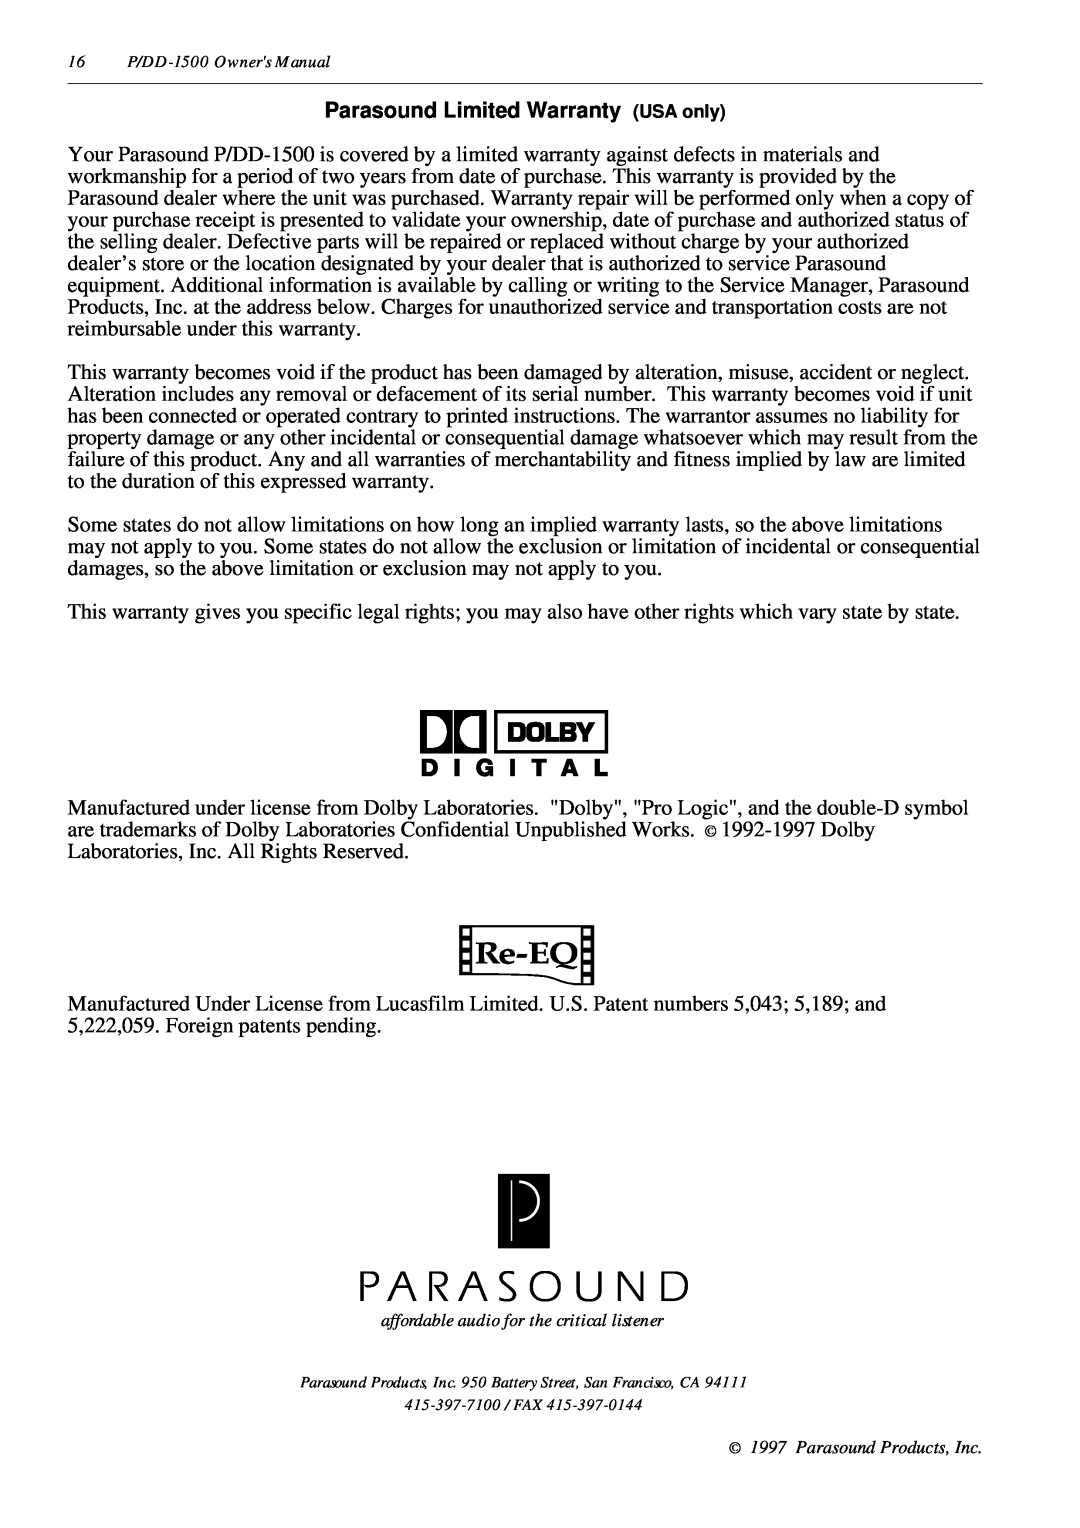 Parasound P/DD-1500 owner manual Parasound Limited Warranty USA only, Re-EQ 